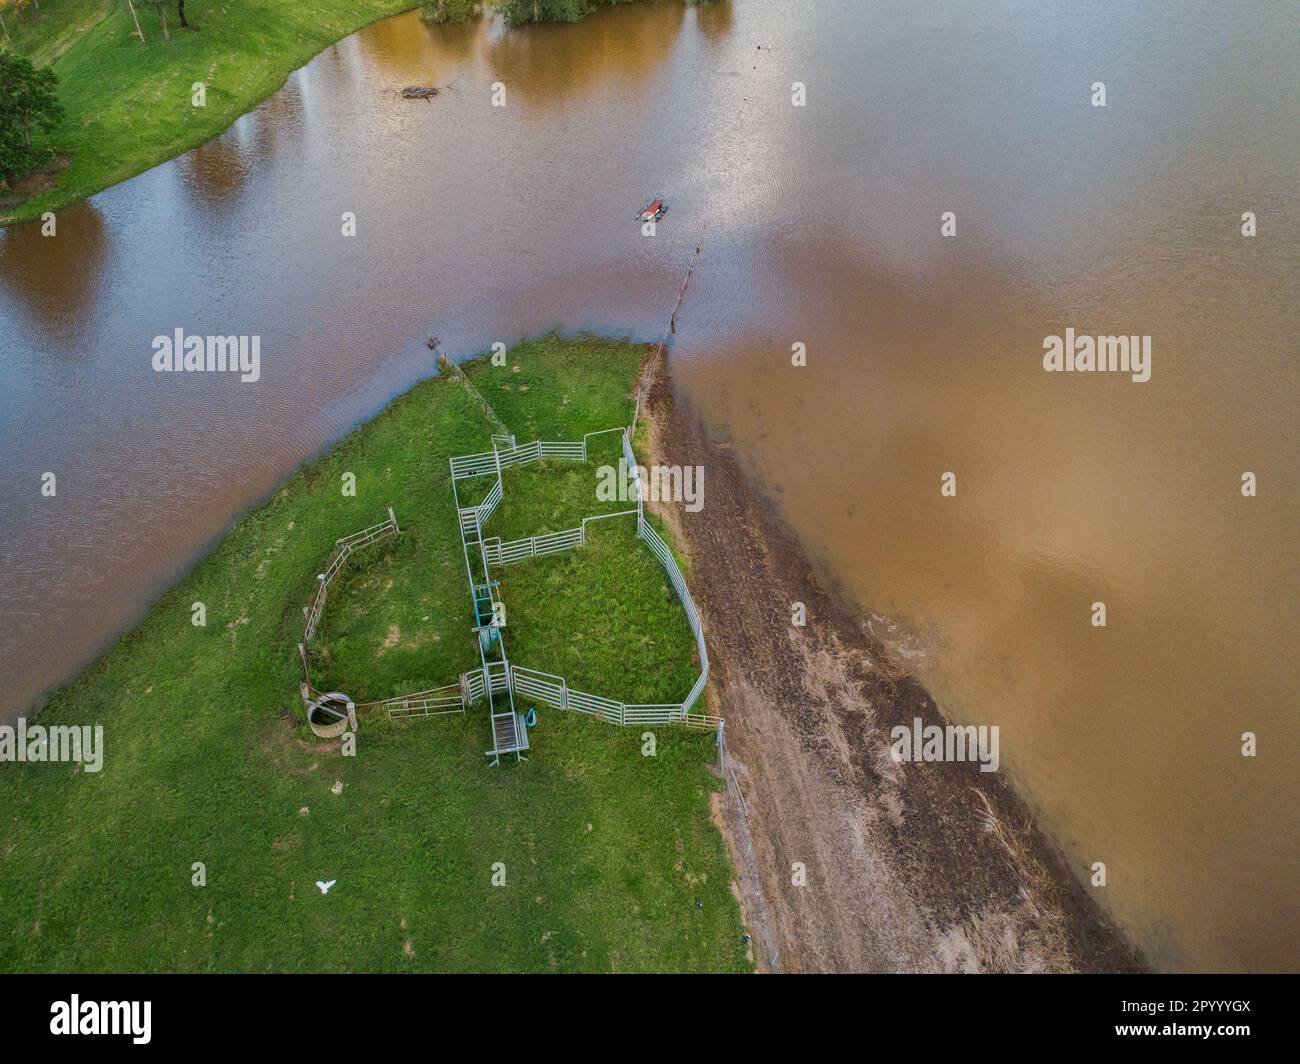 Floodwaters on farmland creeping towards cattle yards seen from aerial view Stock Photo